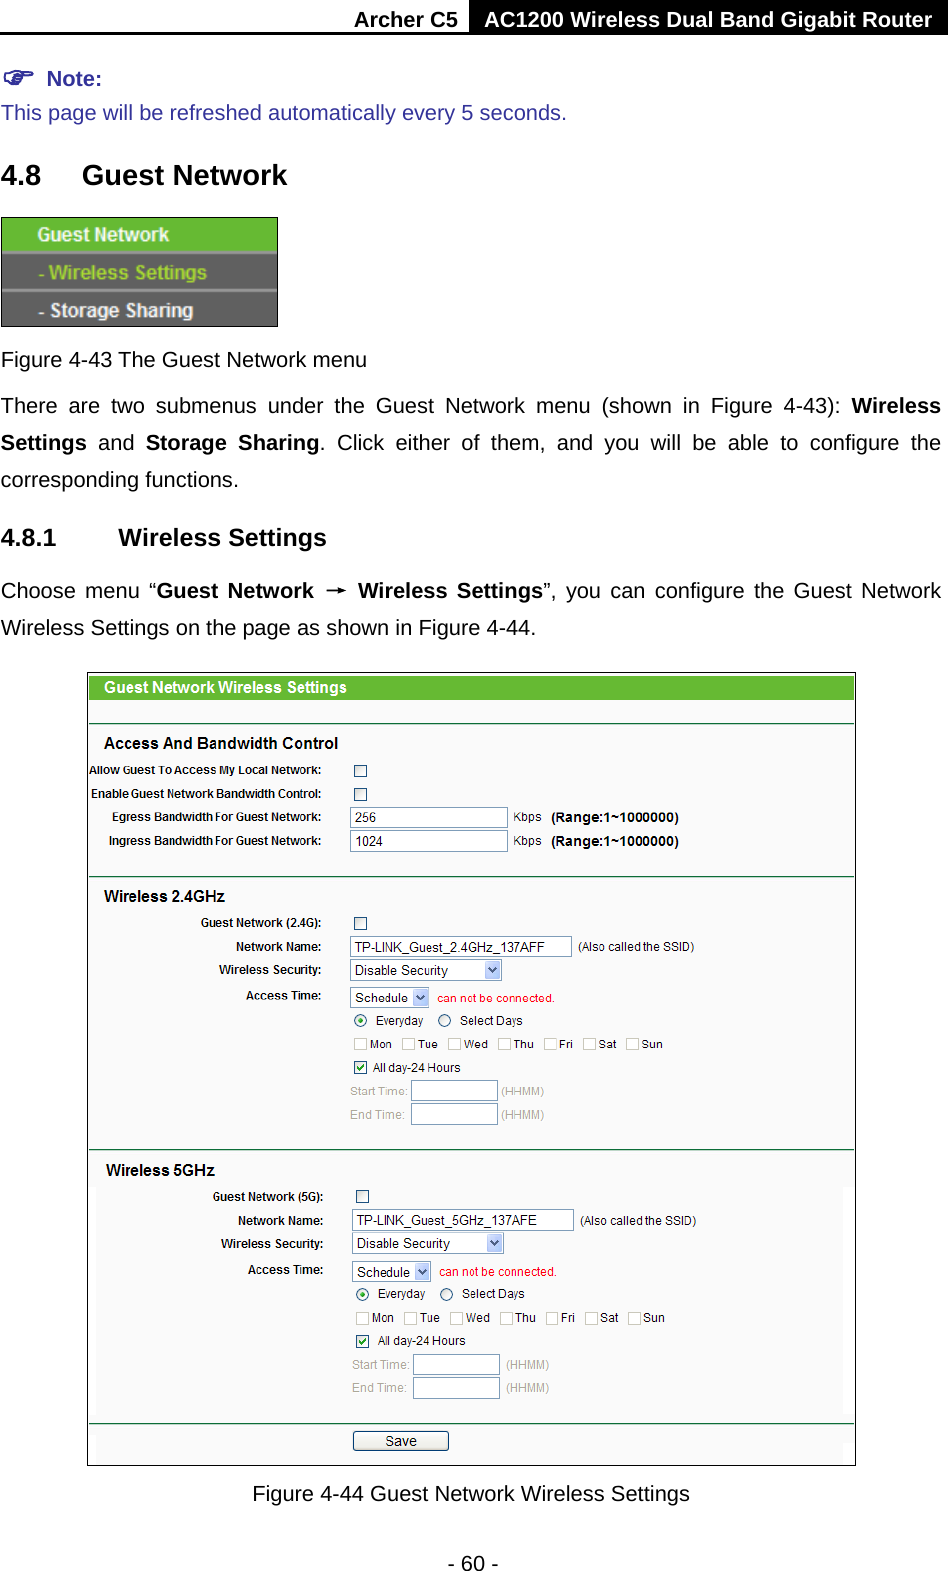 Archer C5 AC1200 Wireless Dual Band Gigabit Router  - 60 -  Note:   This page will be refreshed automatically every 5 seconds. 4.8 Guest Network  Figure 4-43 The Guest Network menu There are two submenus under the Guest Network menu (shown in Figure  4-43):  Wireless Settings  and  Storage Sharing. Click  either of them, and you will be able to configure the corresponding functions. 4.8.1 Wireless Settings Choose menu “Guest Network → Wireless Settings”, you can configure the Guest Network Wireless Settings on the page as shown in Figure 4-44.  Figure 4-44 Guest Network Wireless Settings 